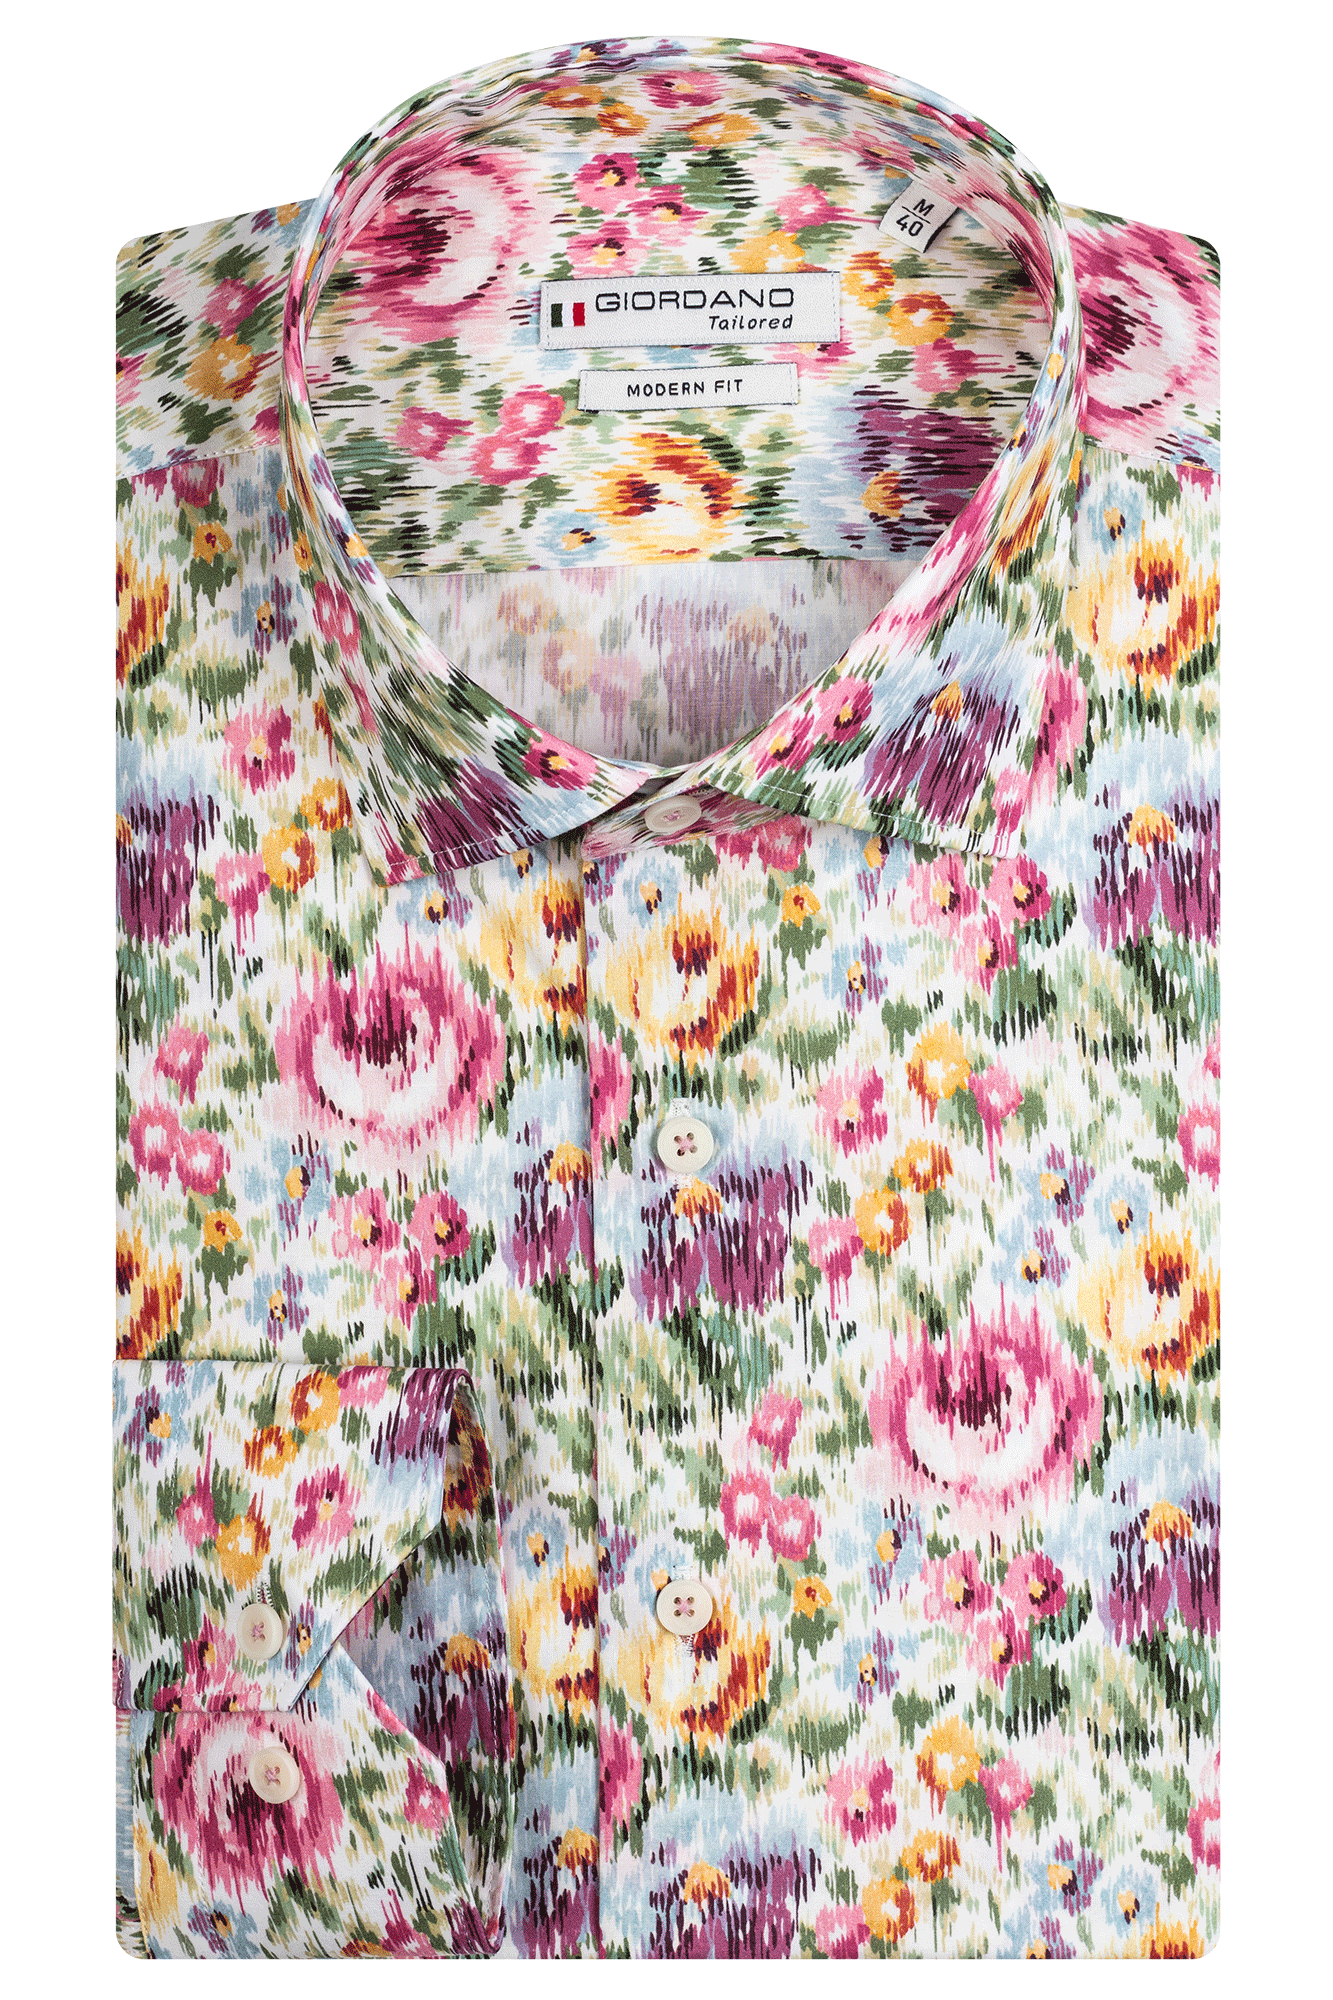 Blurred flowers in cerise Liberty fabric by Giordano